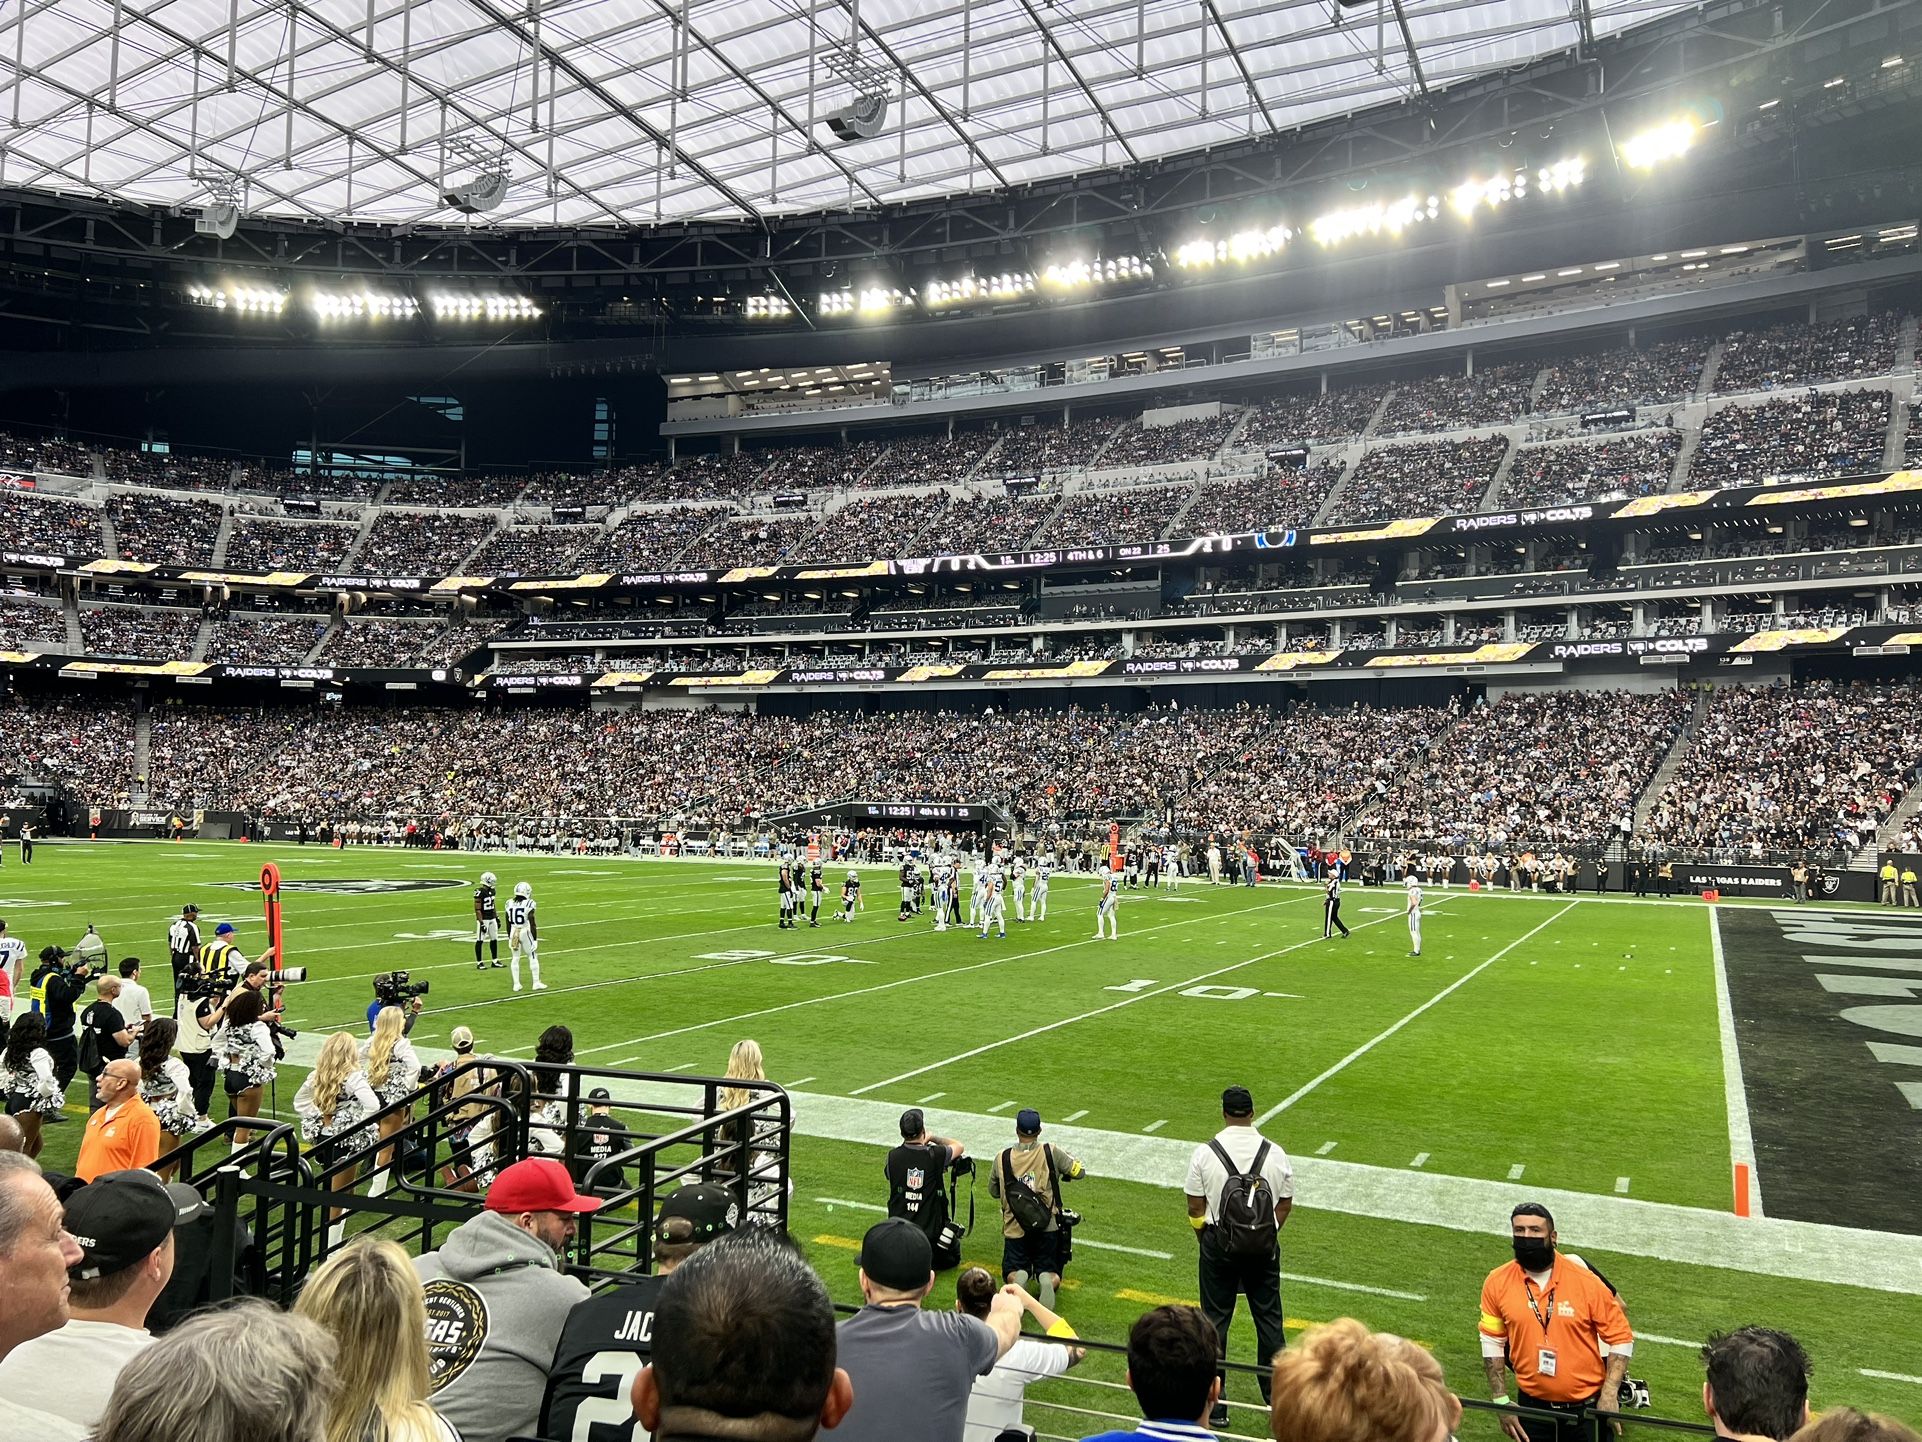 Raiders Vs Chiefs 2 Tickets for Sale in Las Vegas, NV - OfferUp